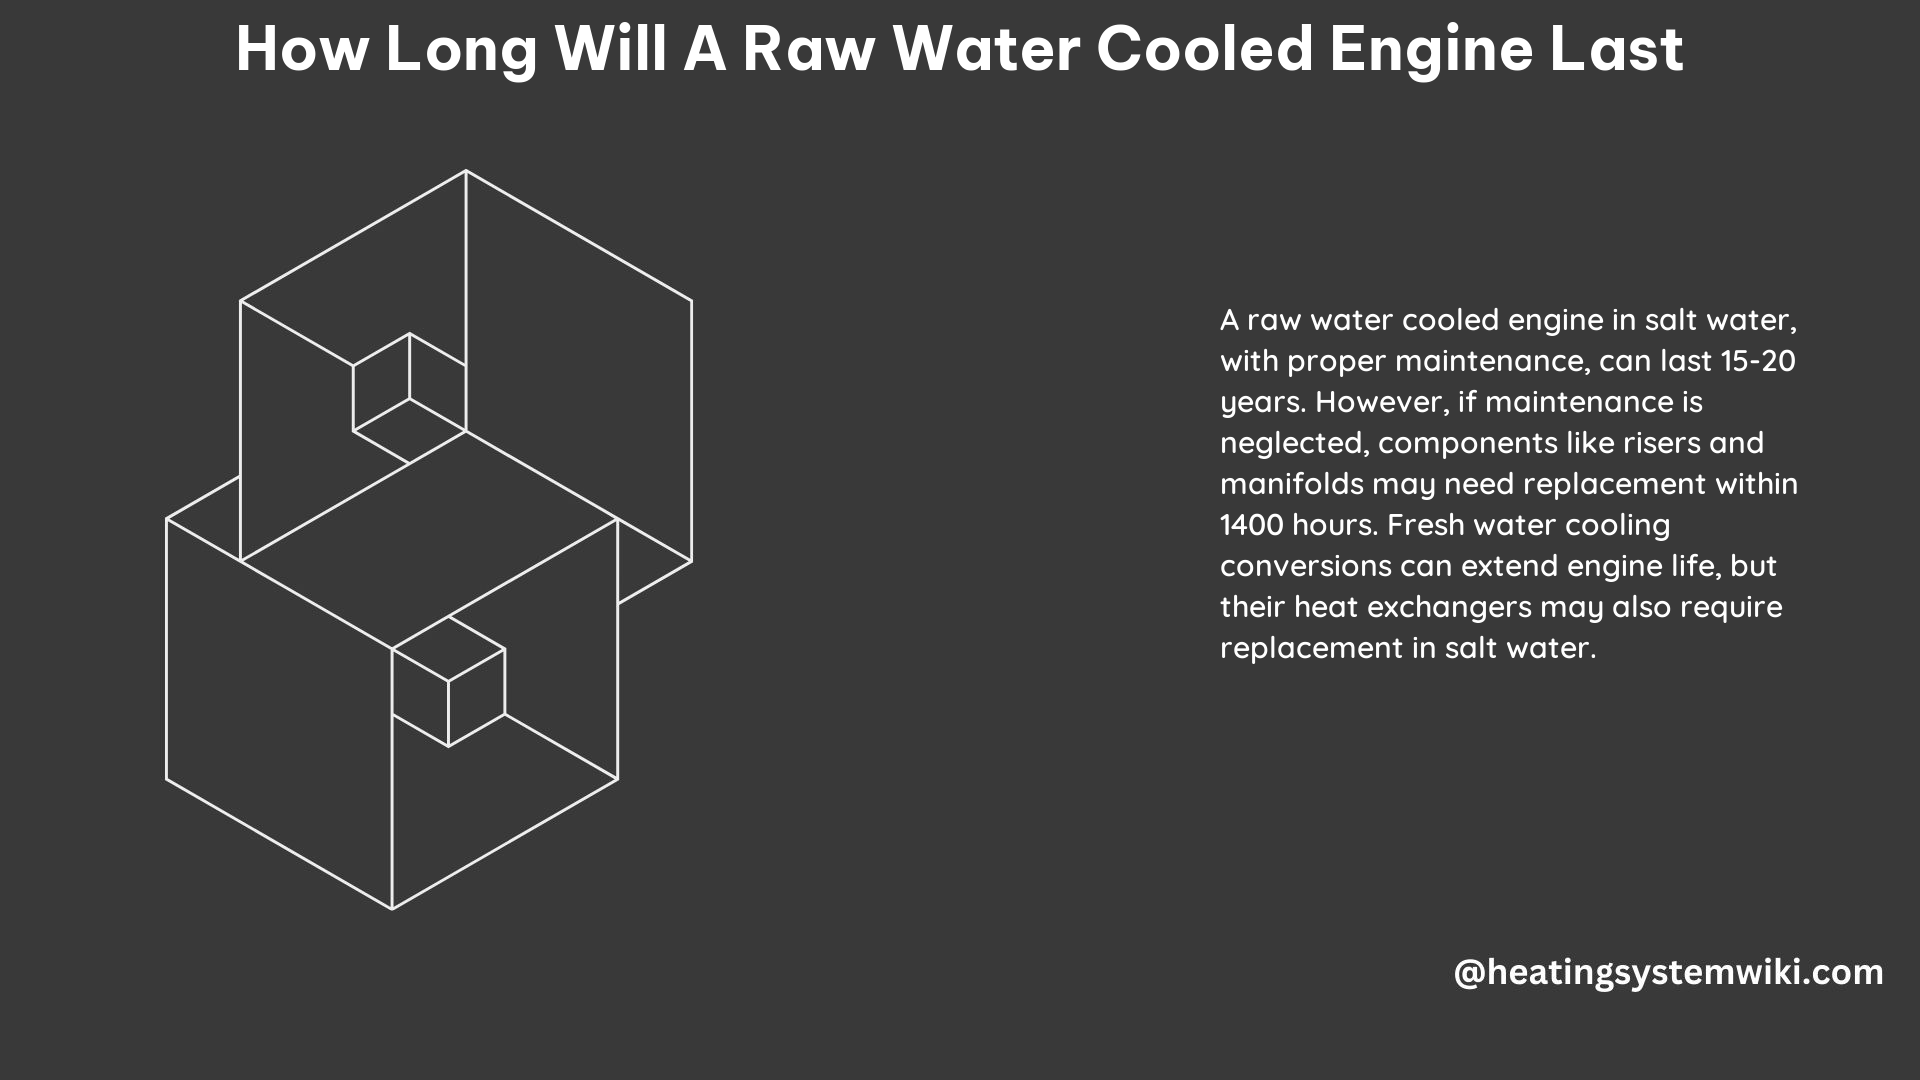 How Long Will a Raw Water Cooled Engine Last